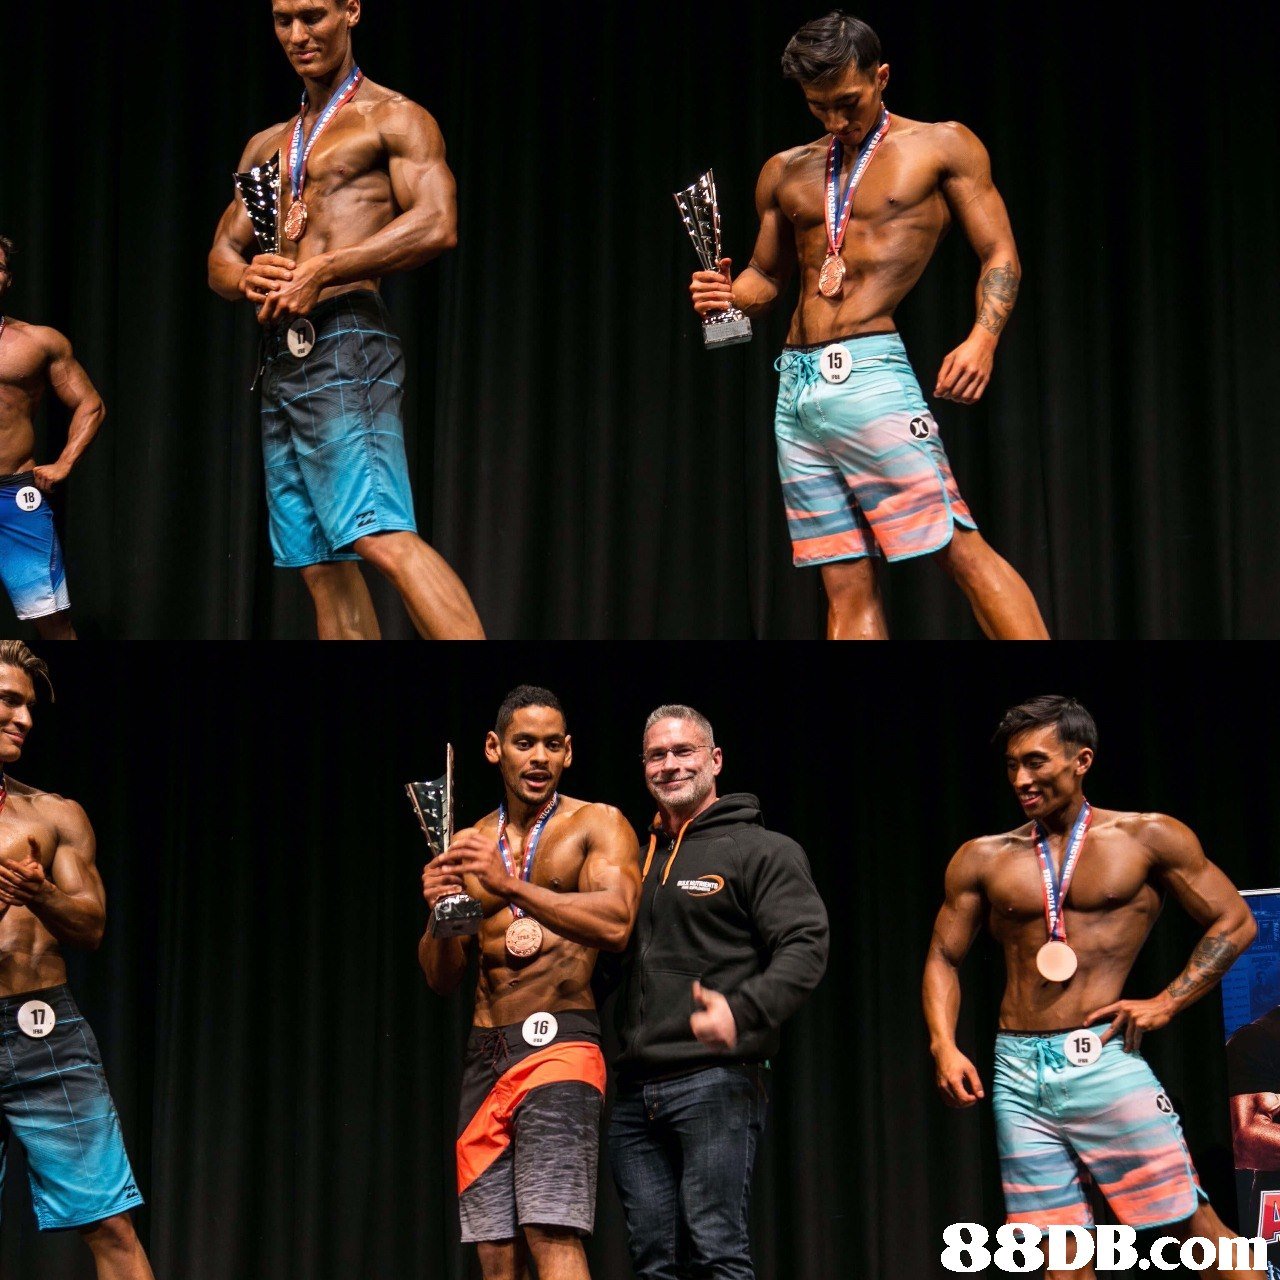 15 18 17 16 15 88DB.con  Bodybuilding,Barechested,Muscle,Bodybuilder,Competition event